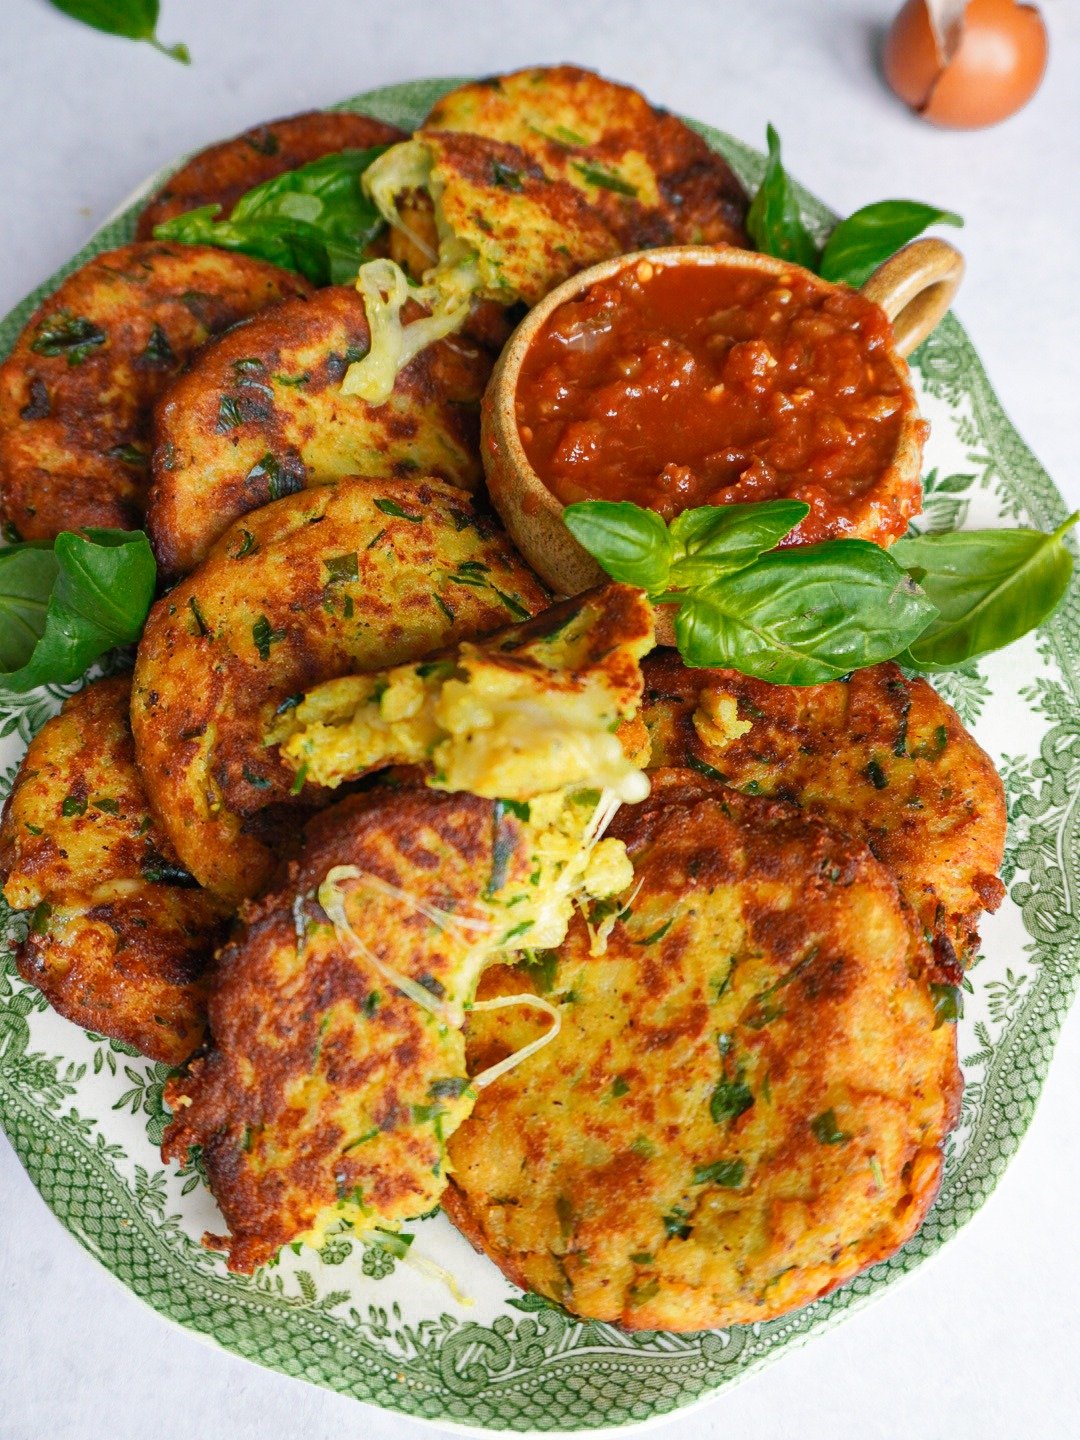 A plate of potato patties with ketchup ready to be served